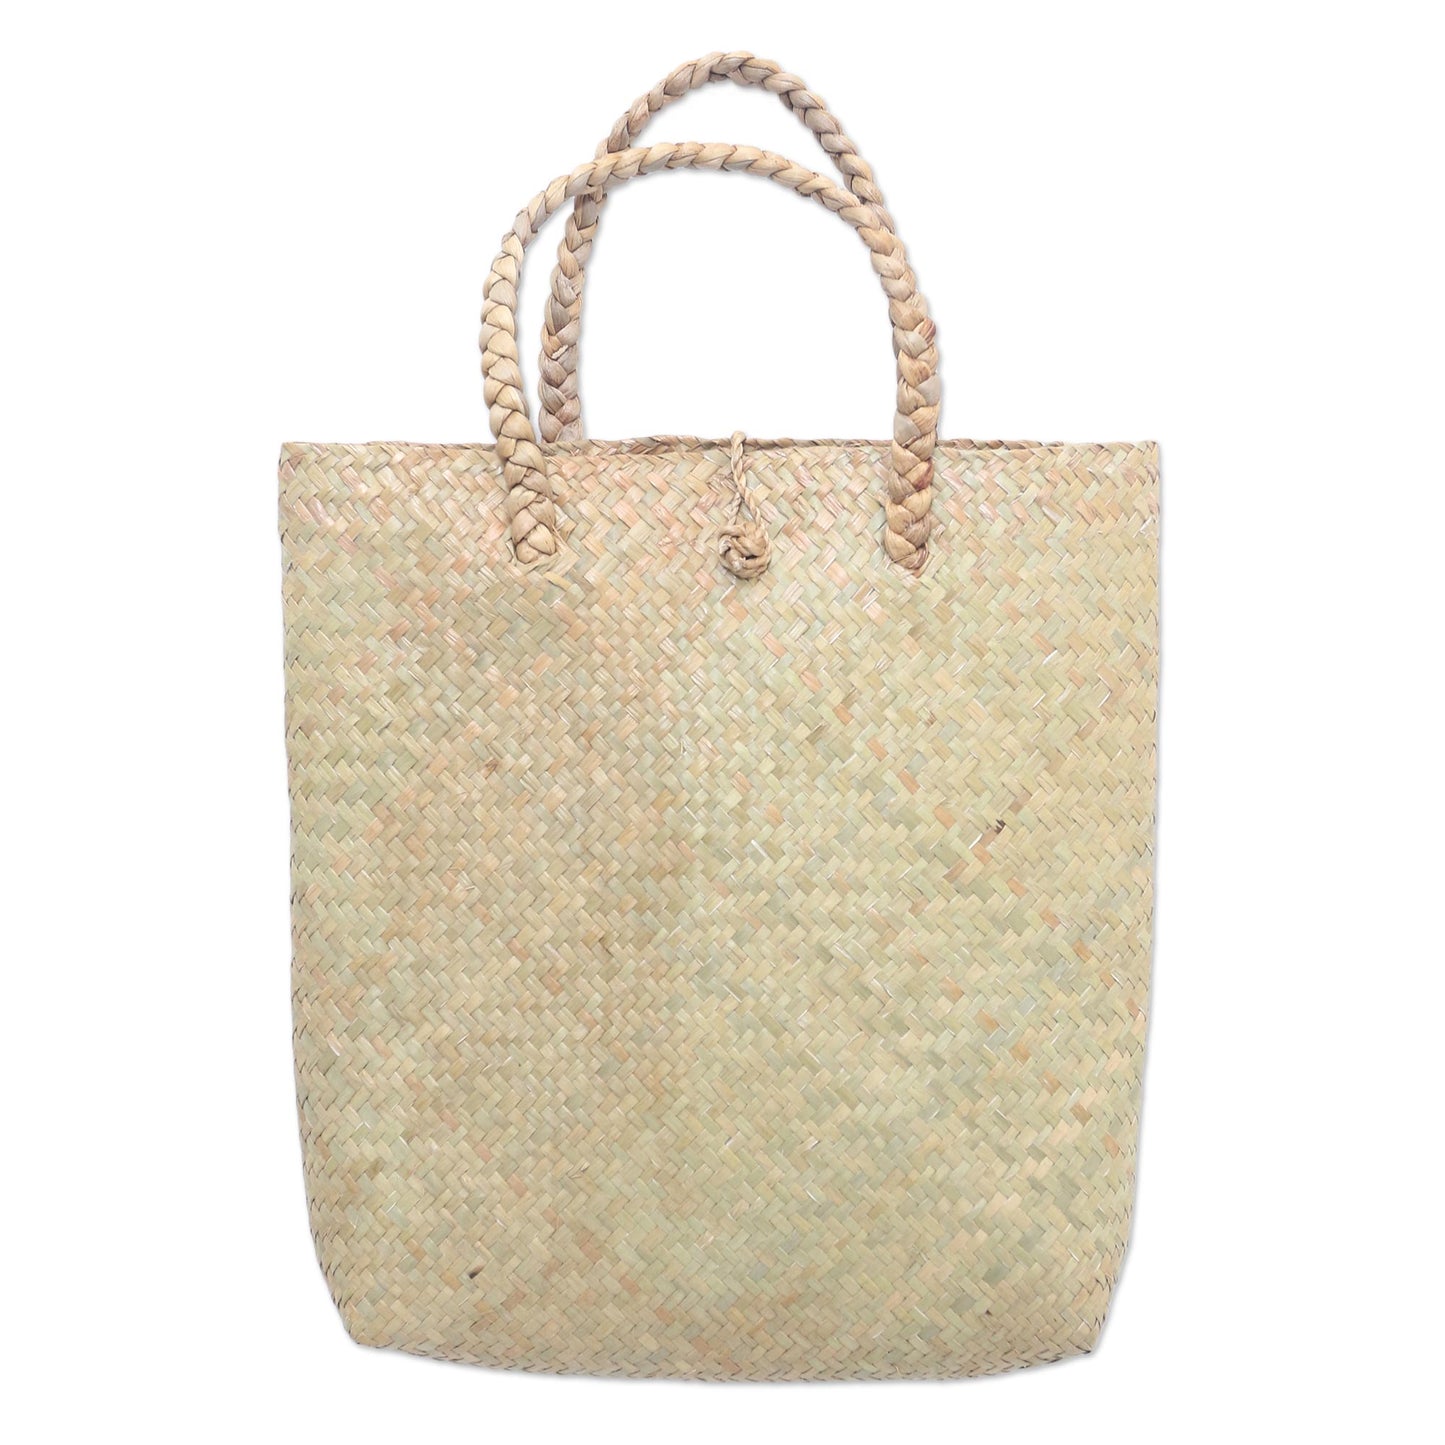 Sturdy Carrier Artisan Crafted Natural Fiber Tote Bag